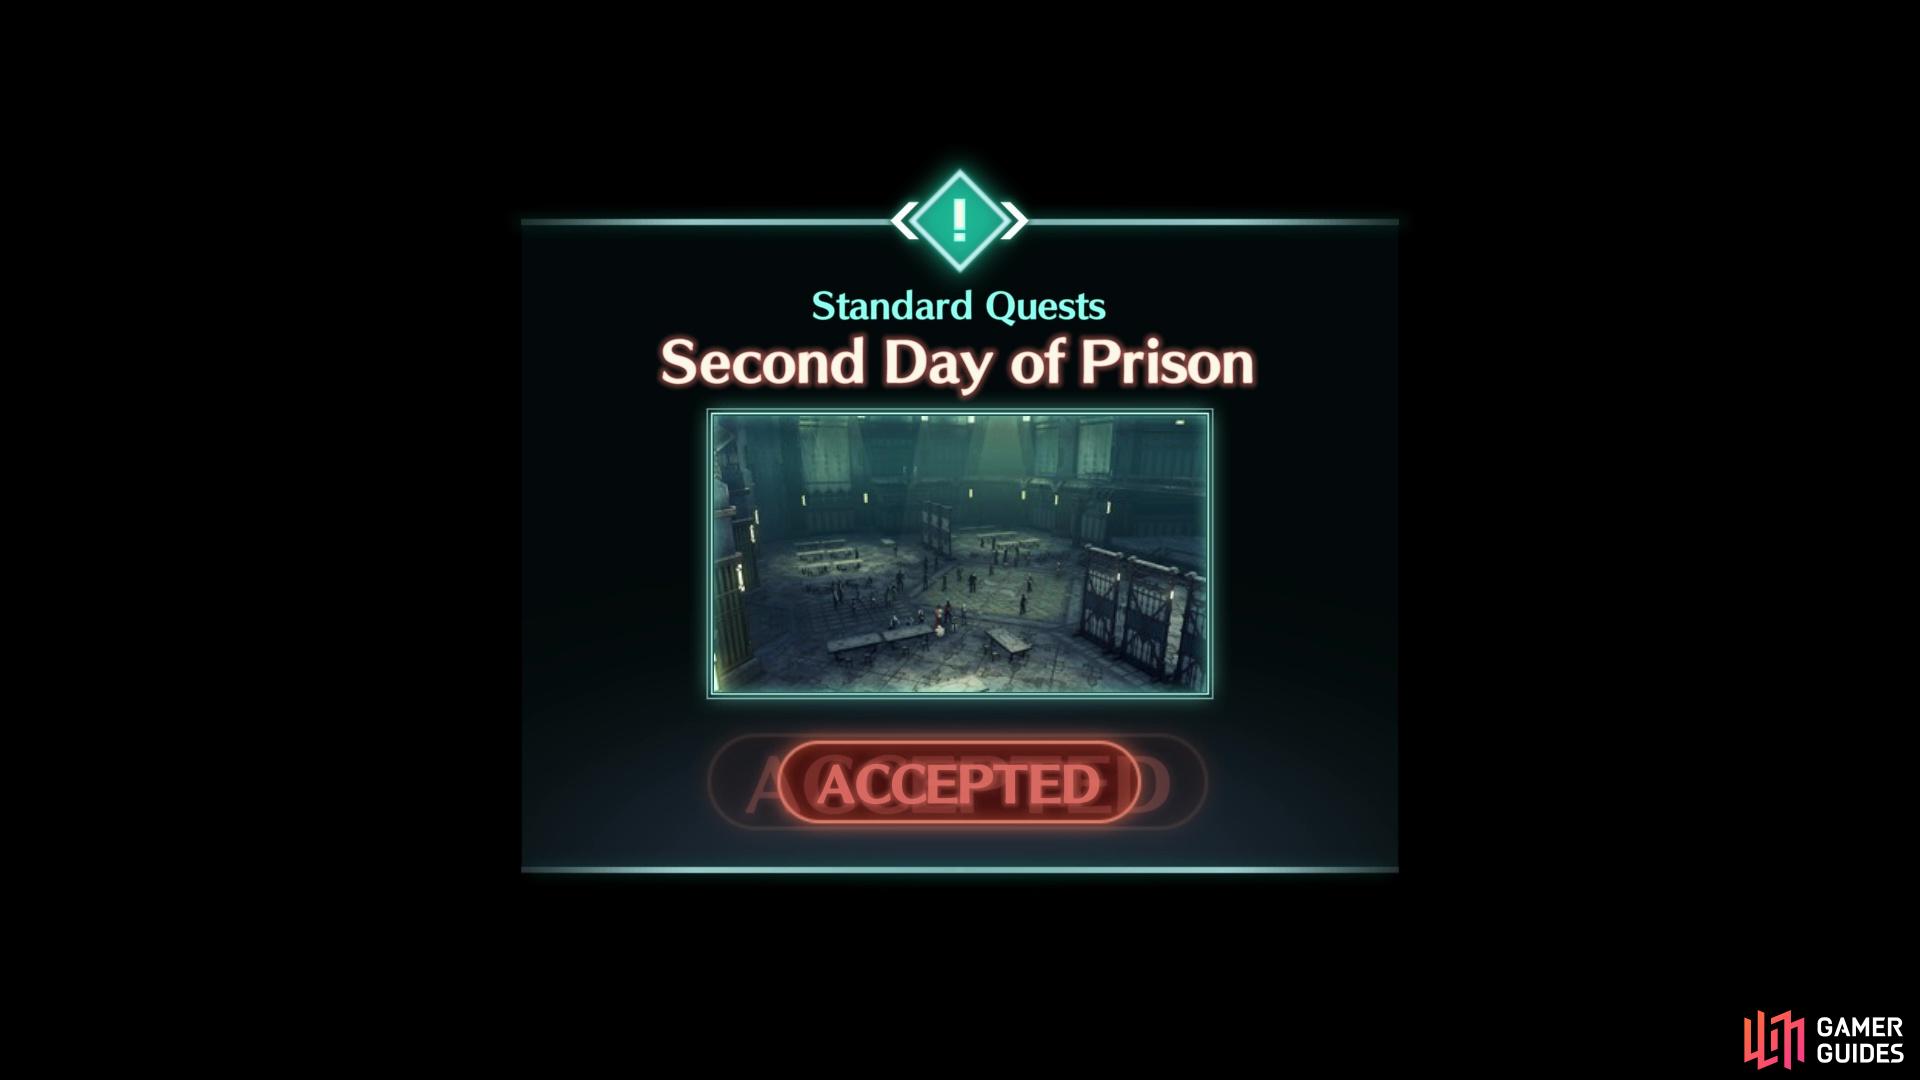 Second Day of Prison Standard Quest.